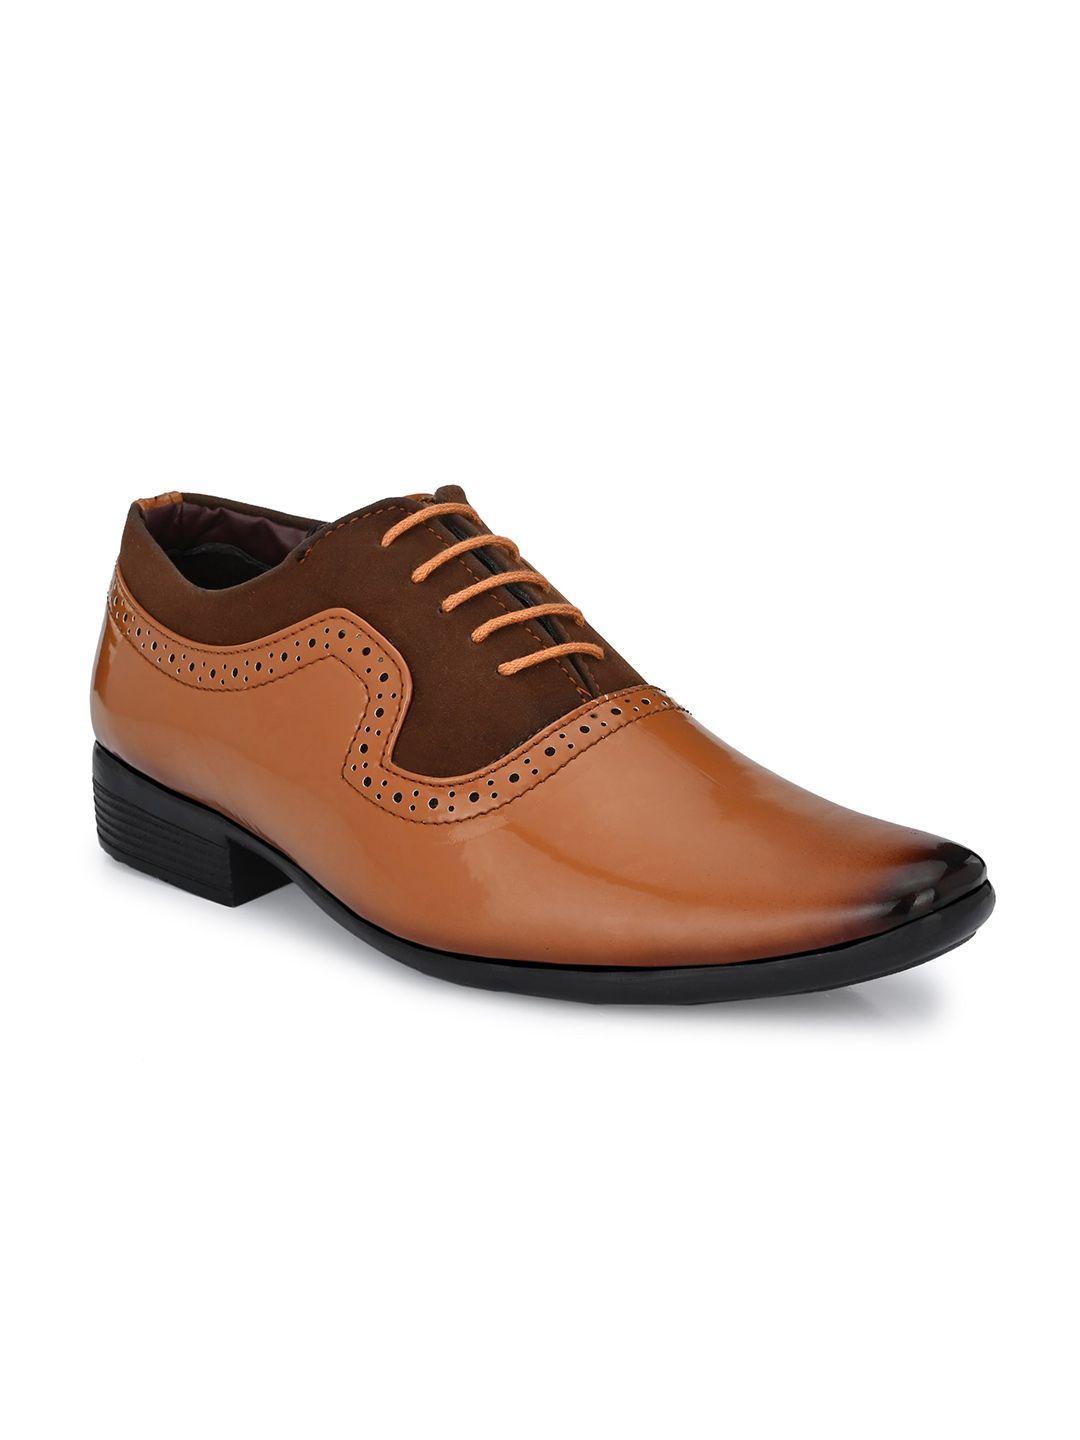 mr.wonker Men Tan Highly Comfortable Synthetic Patent Lightweight Formal Derby Shoes